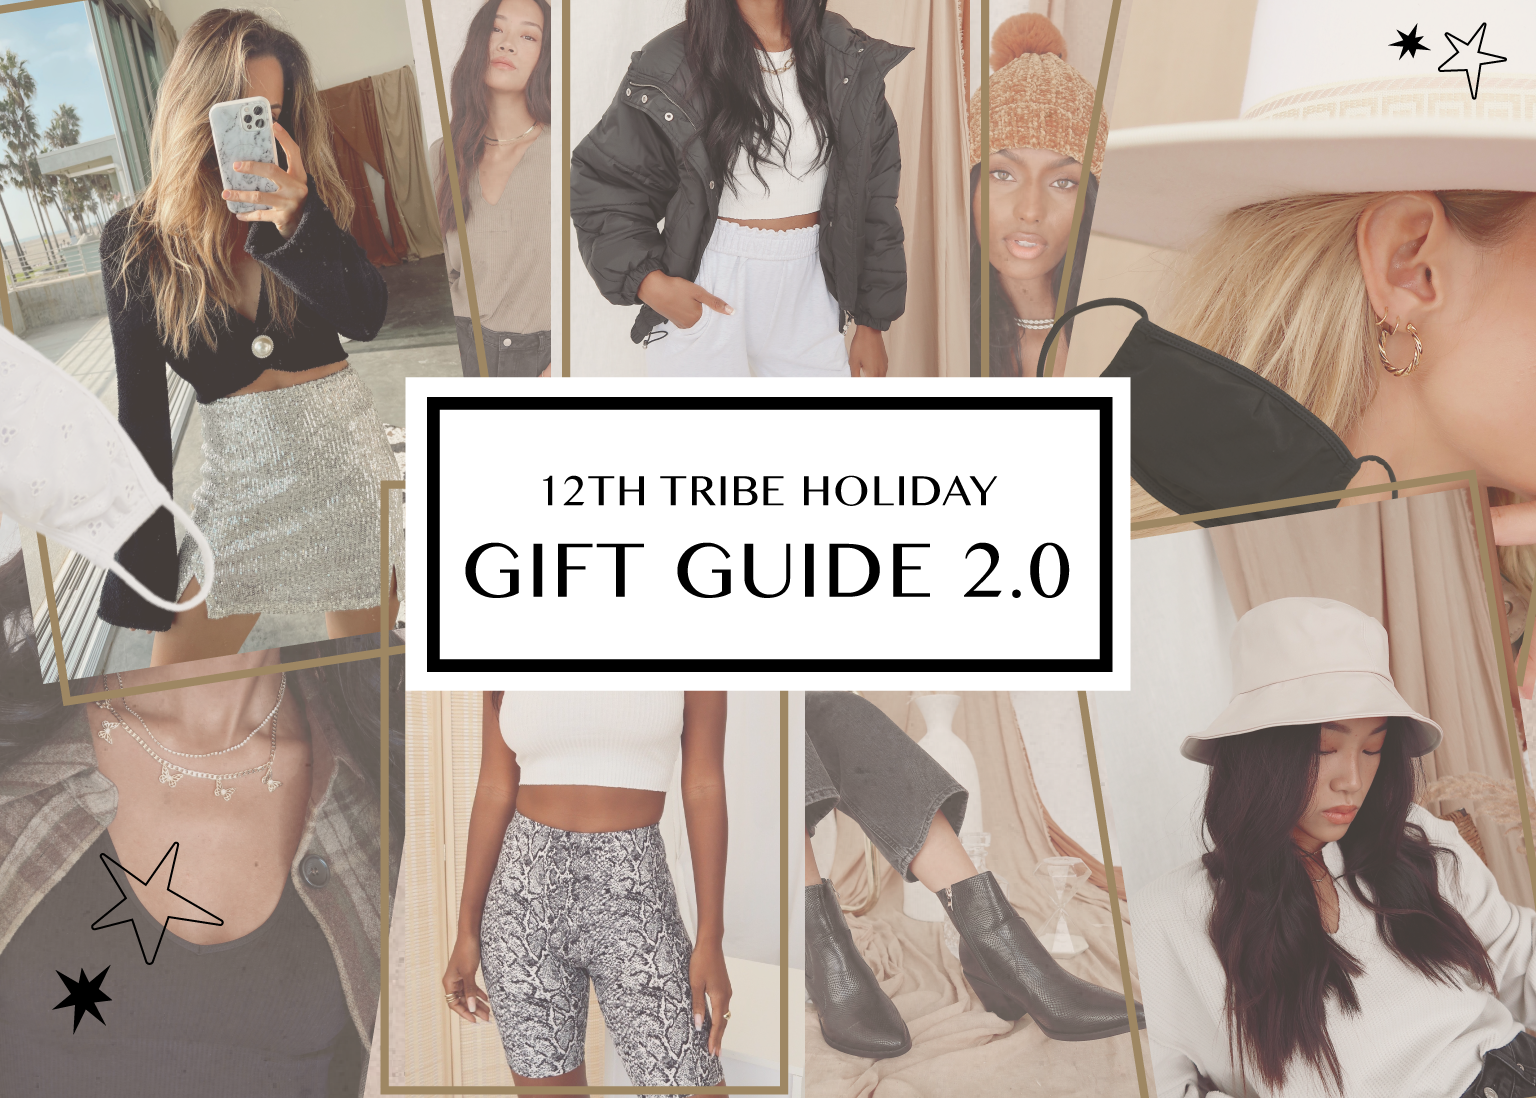 12th Tribe Holiday Gift Guide 2.0